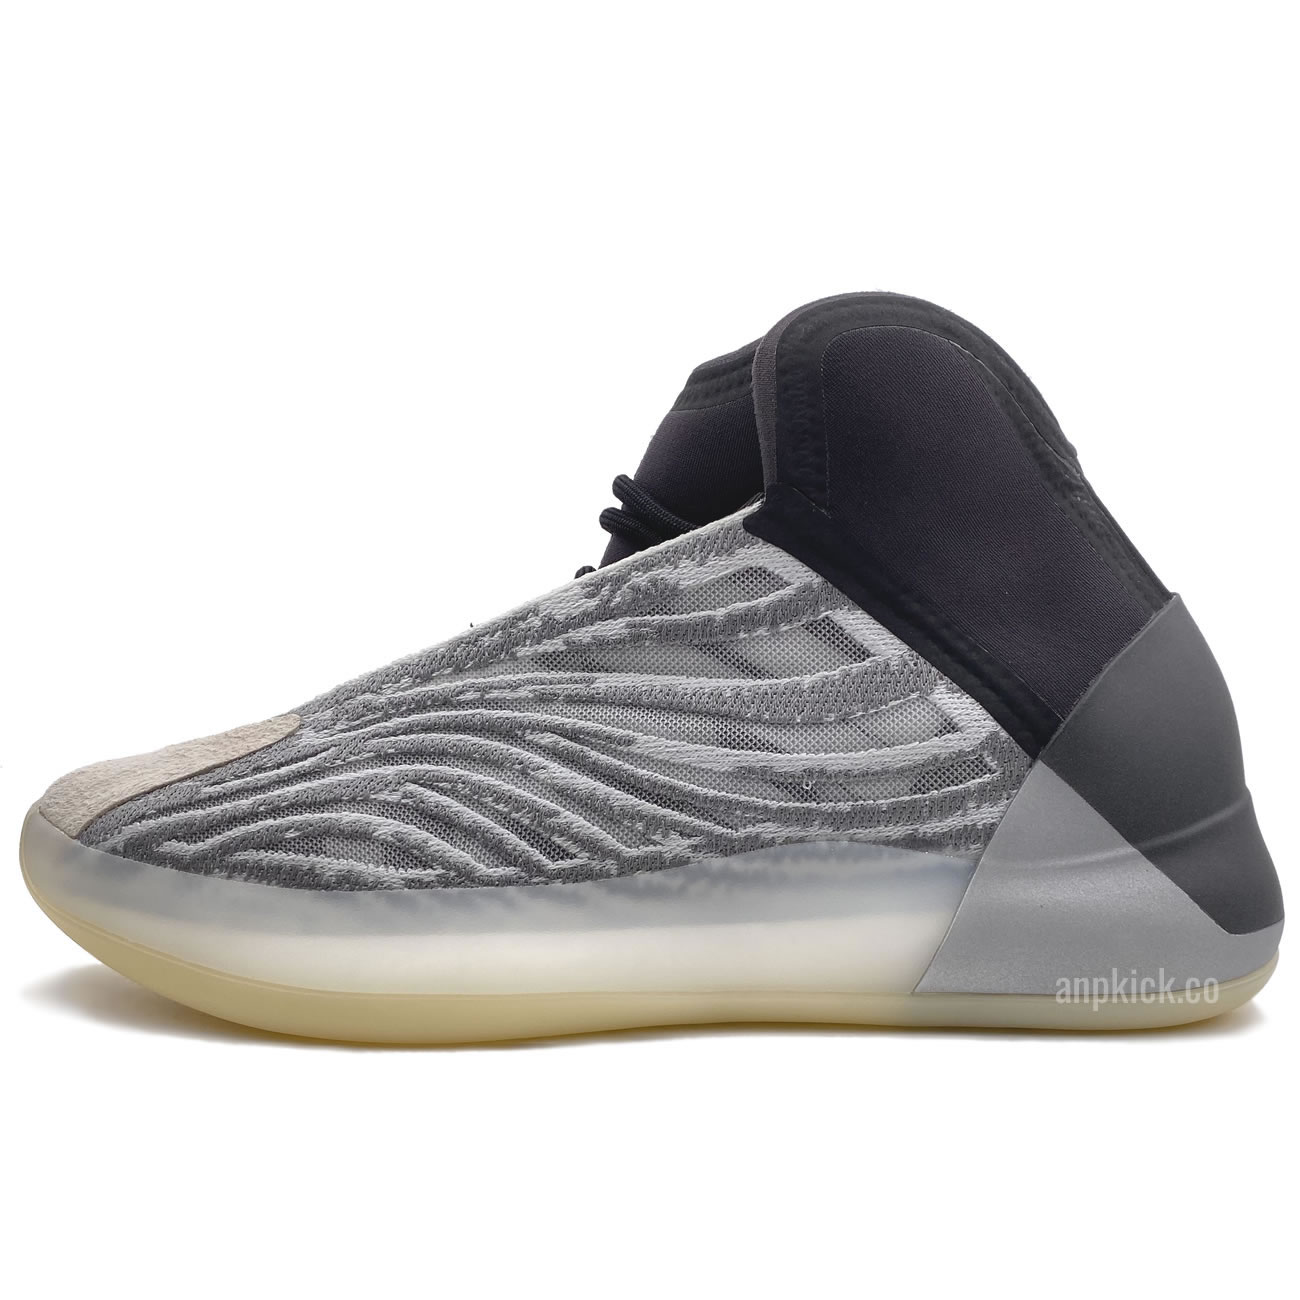 adidas Yeezy Basketball "Quantum" Boost For Sale Release Q46473